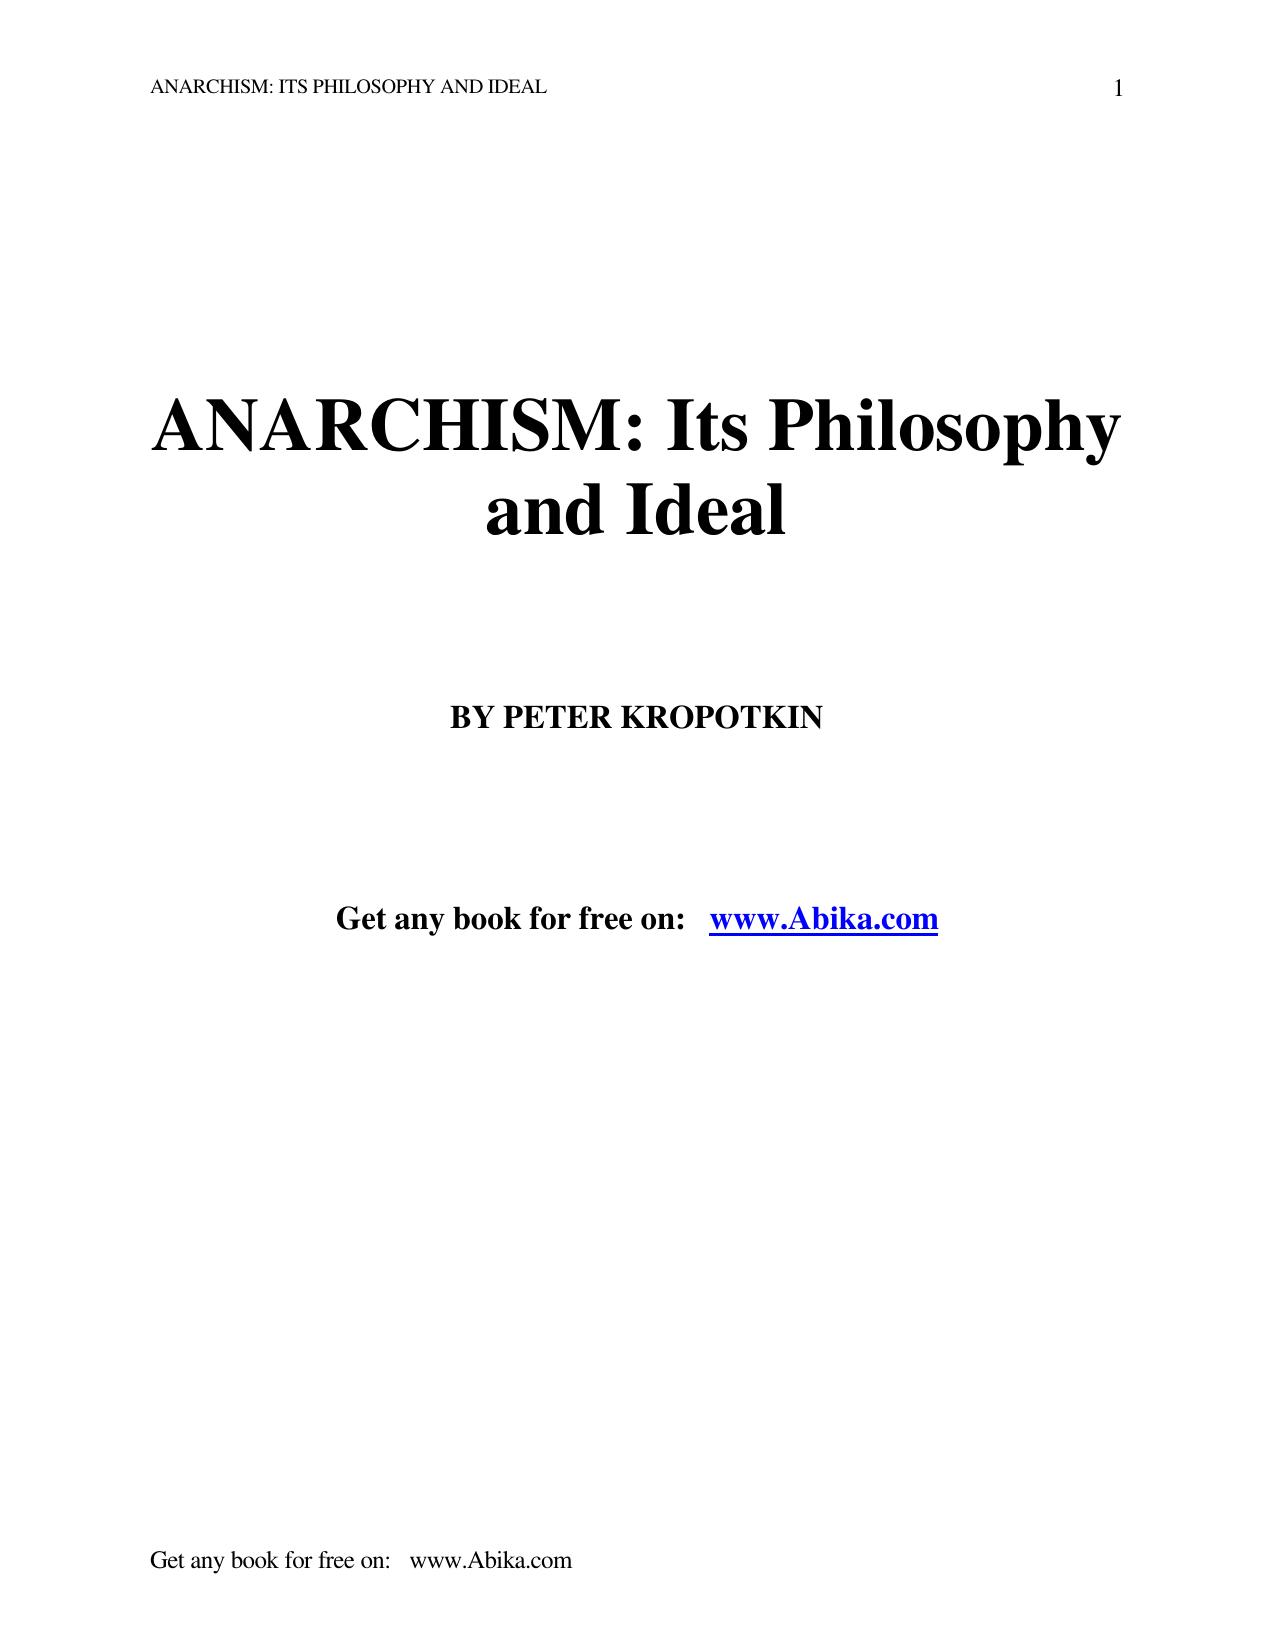 Anarchism: Its Philosophy and Ideal